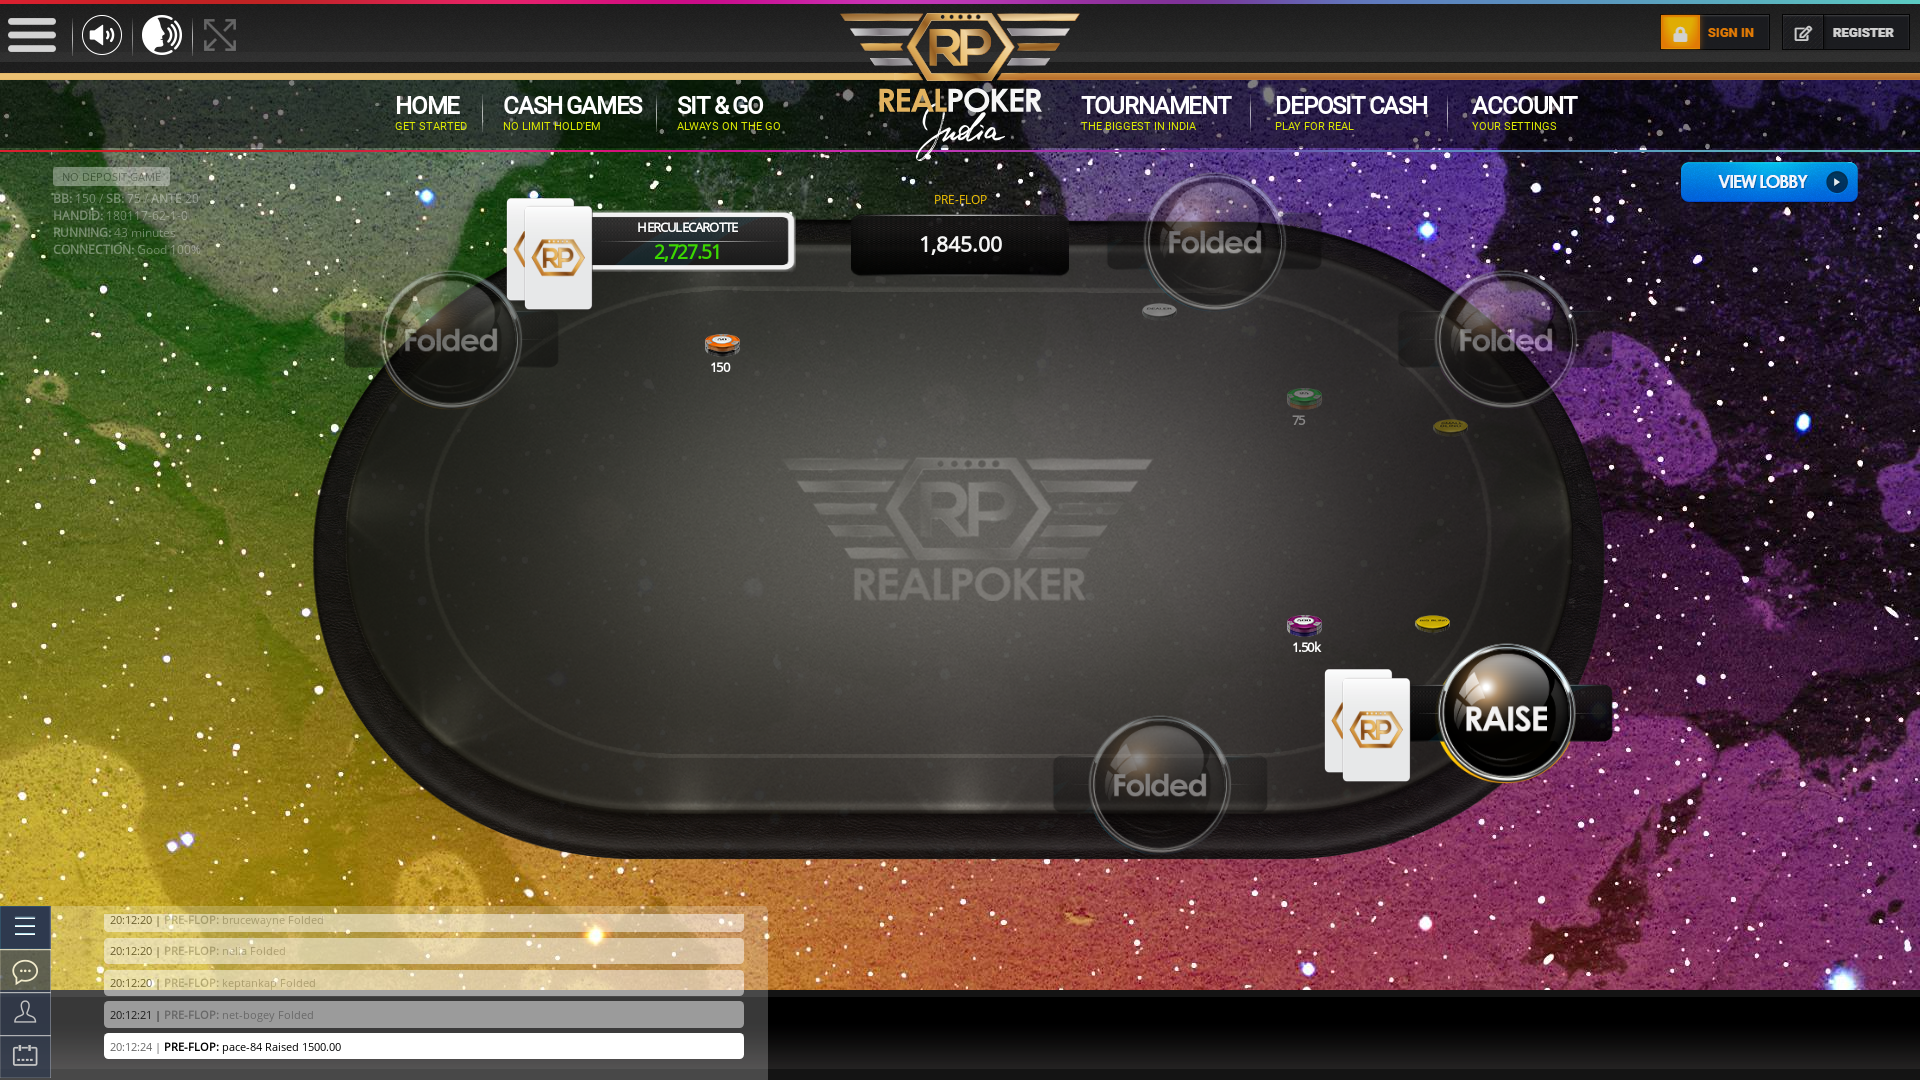 Real poker 10 player table in the 43rd minute of the match